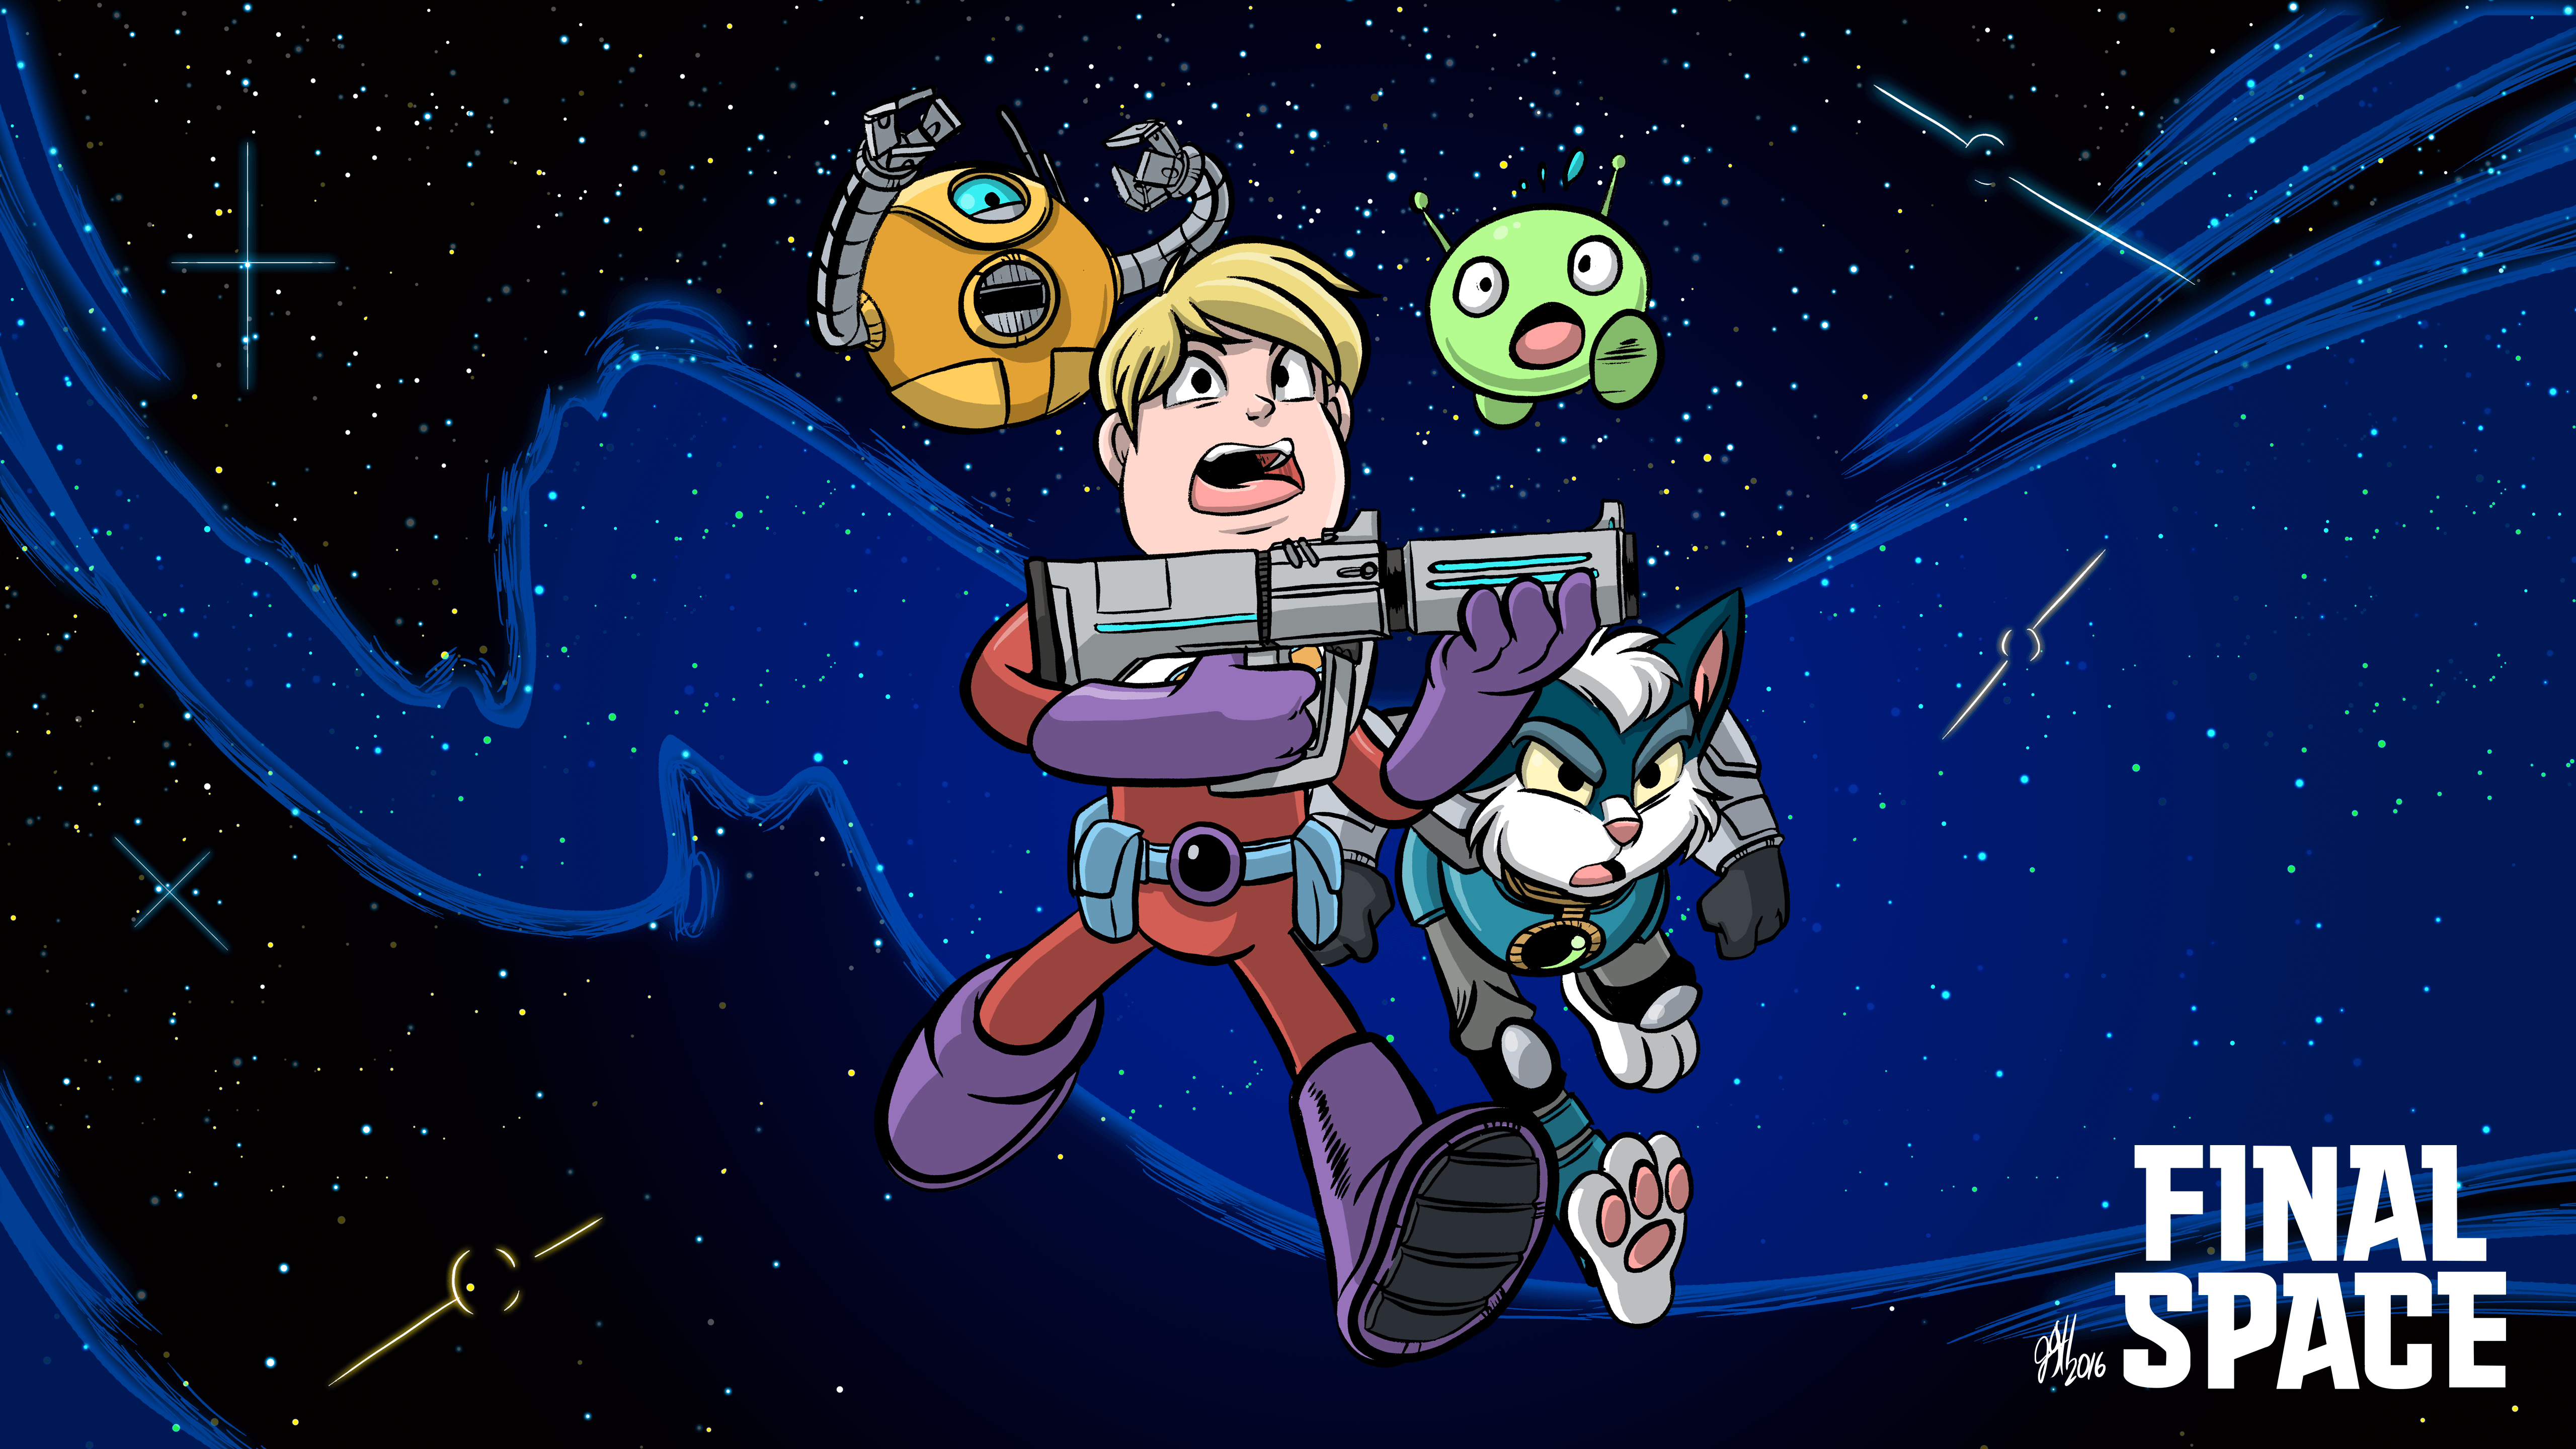 We need more Final Space wallpapers. Hopefully more will surface